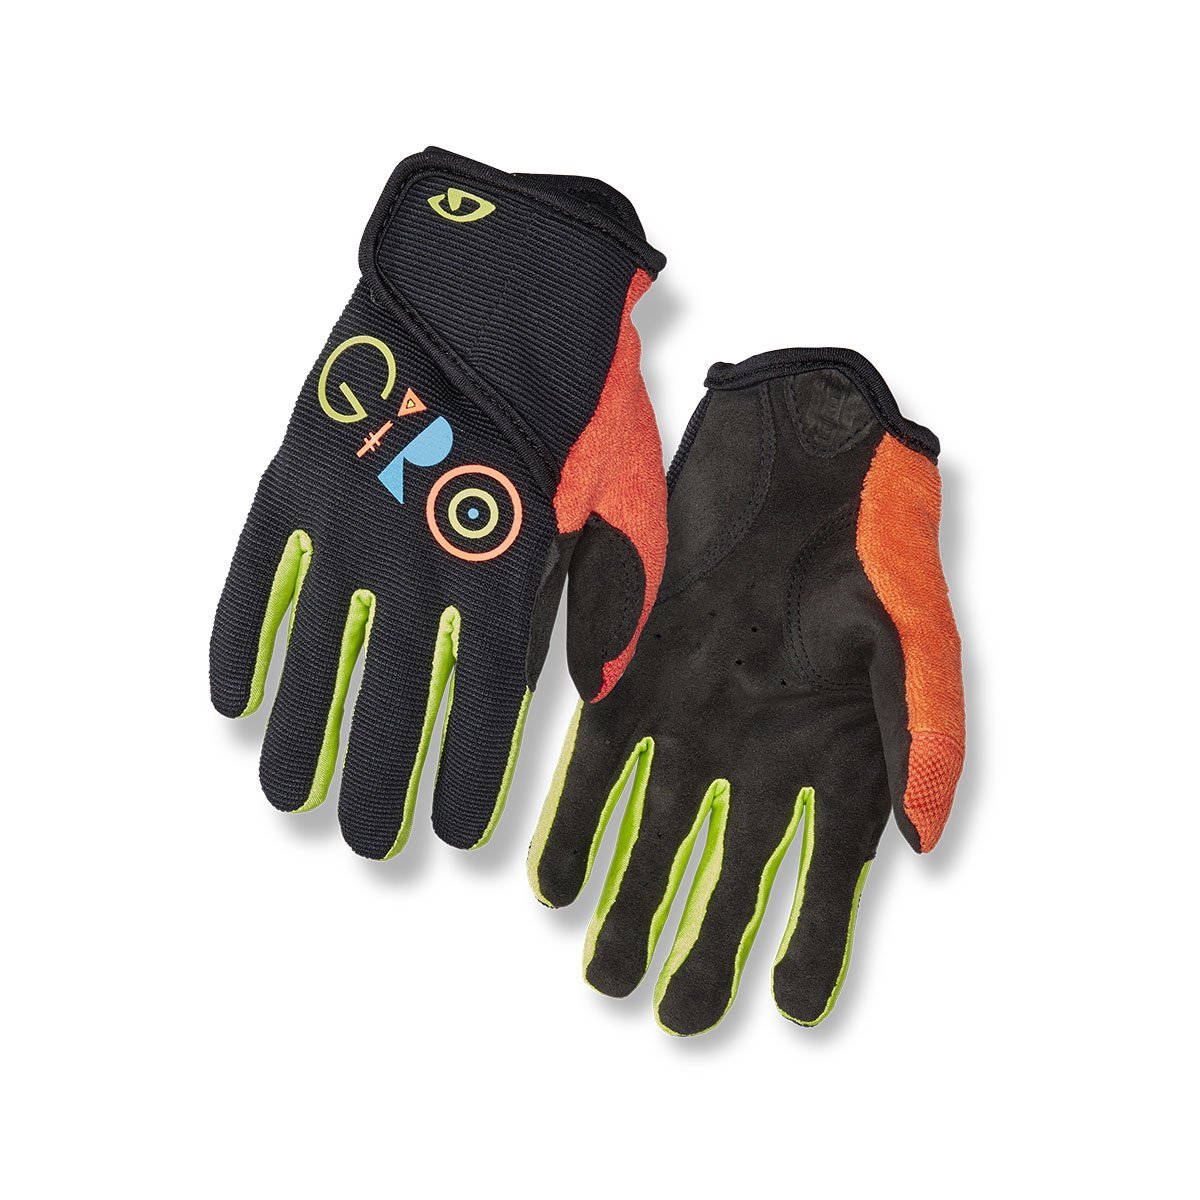 Vgo.. Yellow with Blue,SL3101-JM 2Pairs Age 10-11,11-12,12-13 Junior Boys Half-Finger Breathable Climbing Gloves Outdoor Adventure Gloves with Anti-Slip Padding Palm